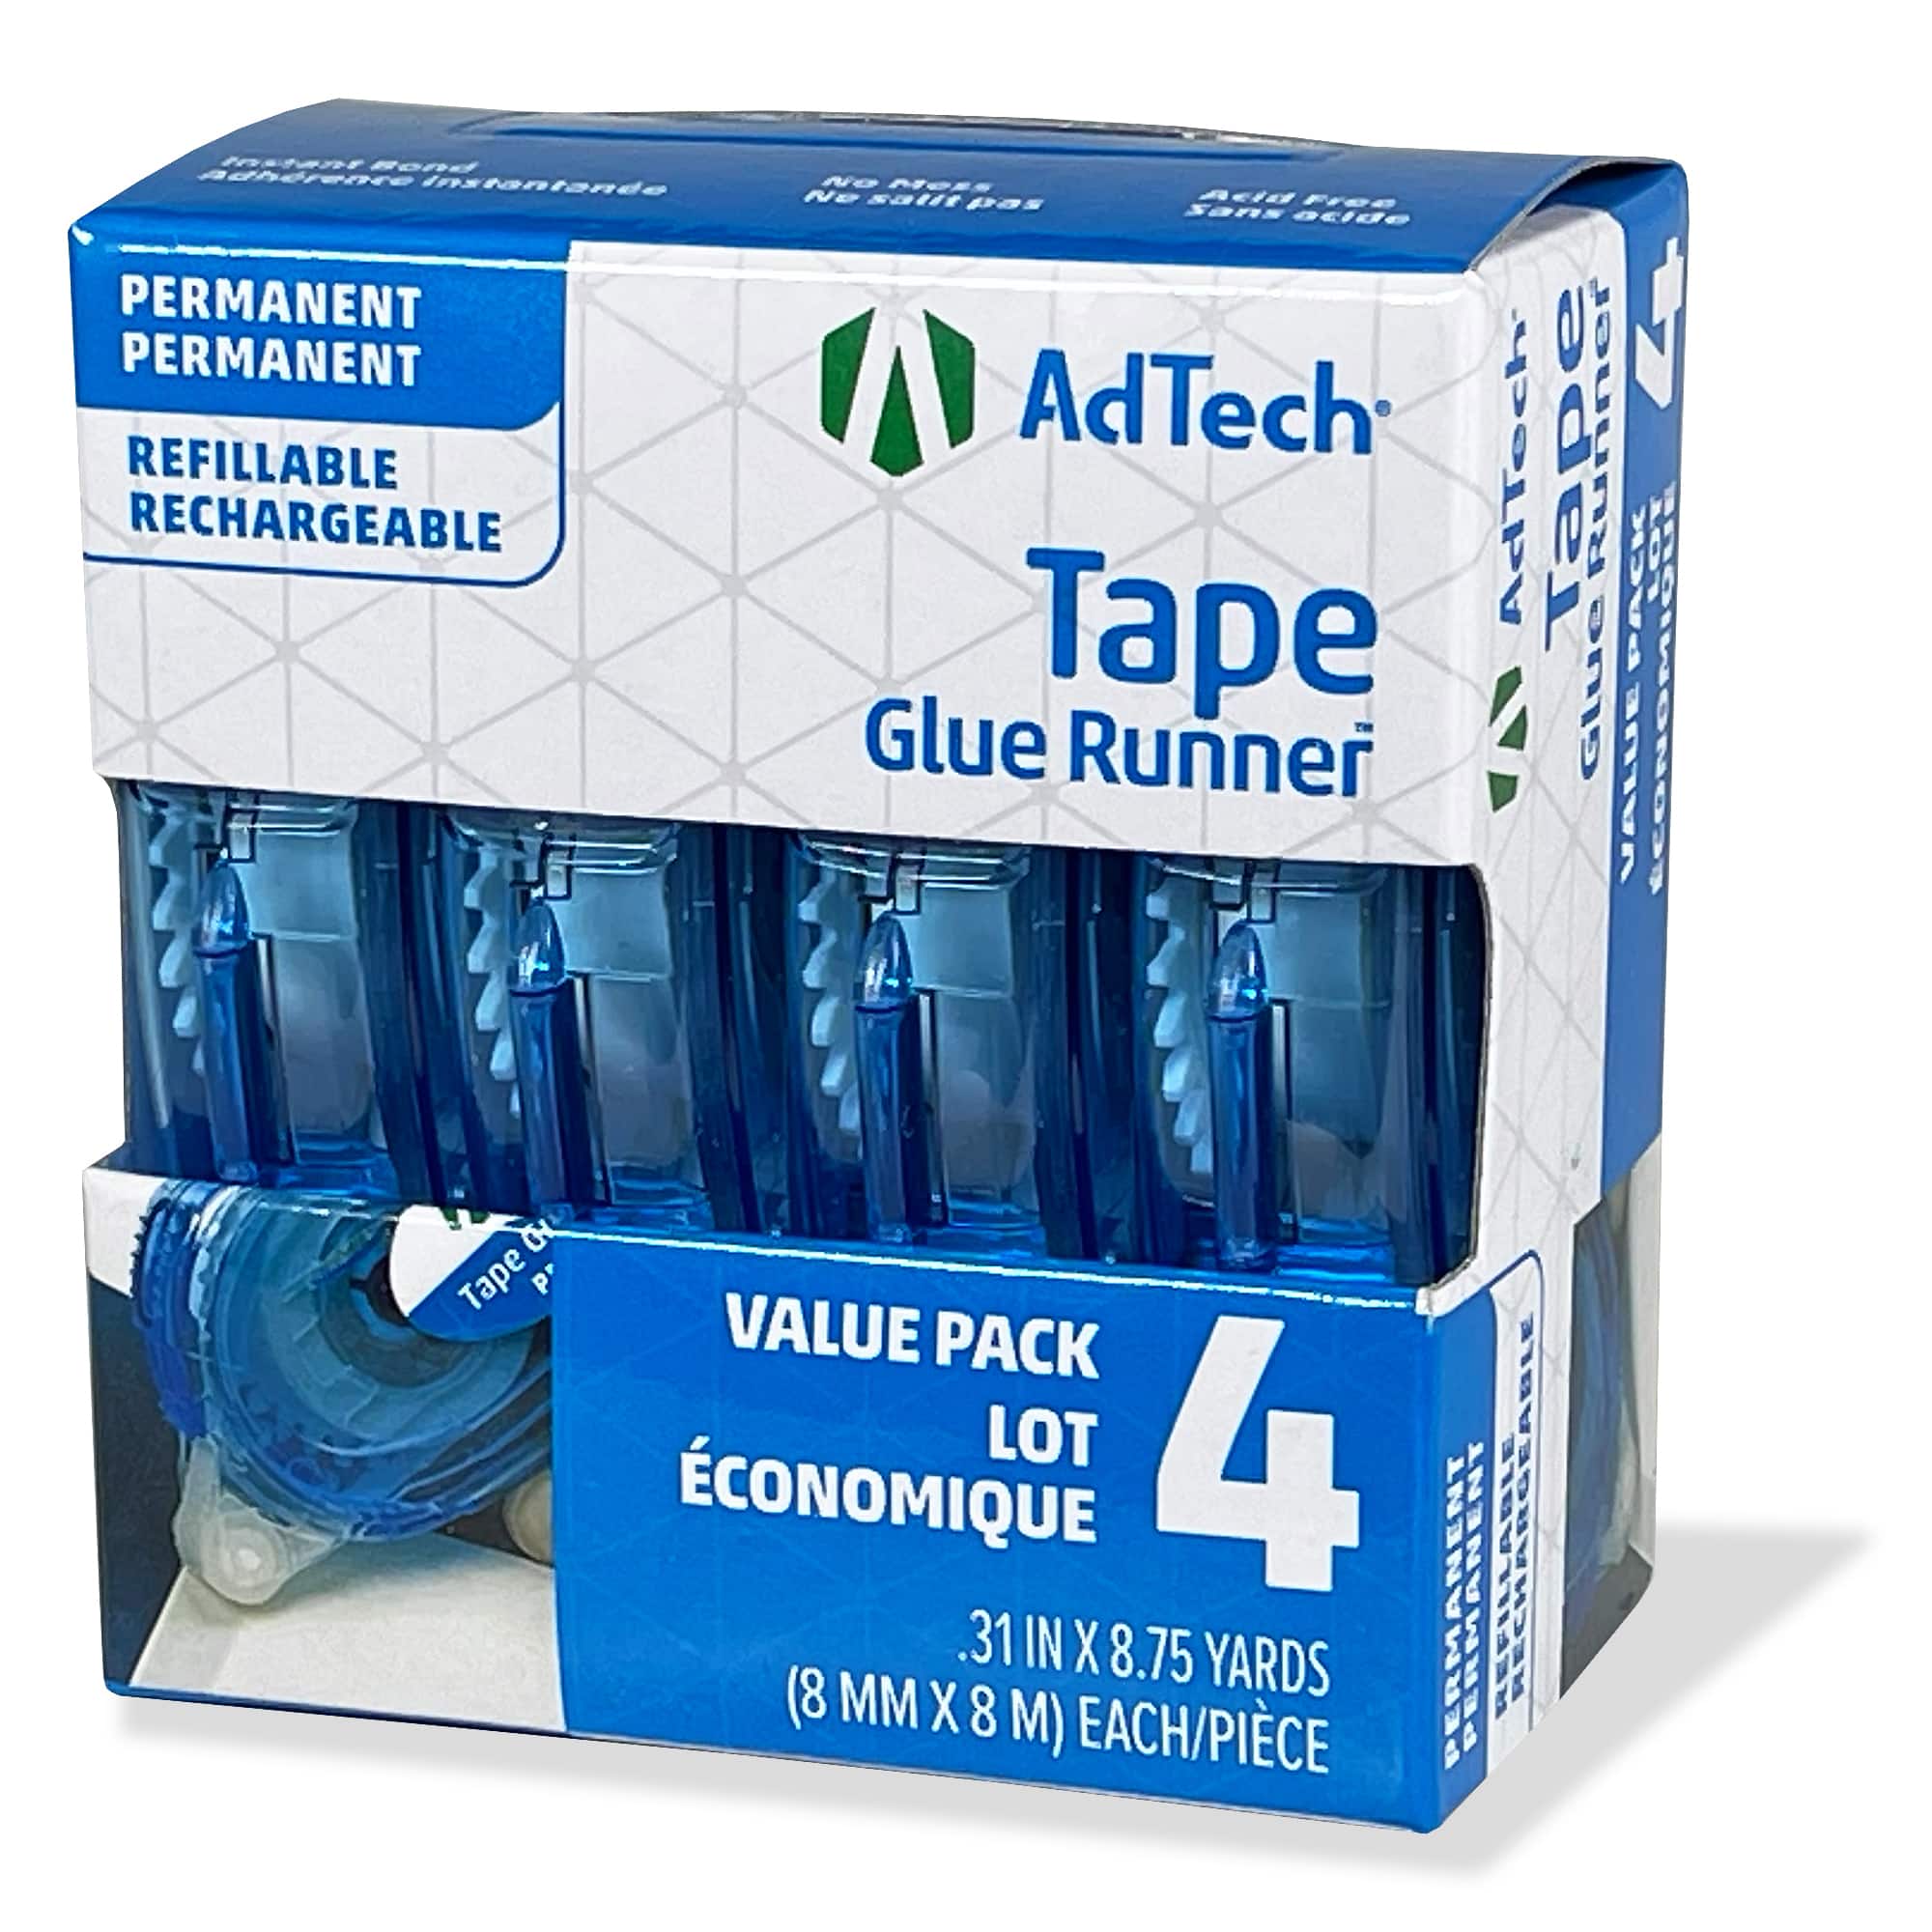 AdTech Crafter's Tape Refills Value Pack